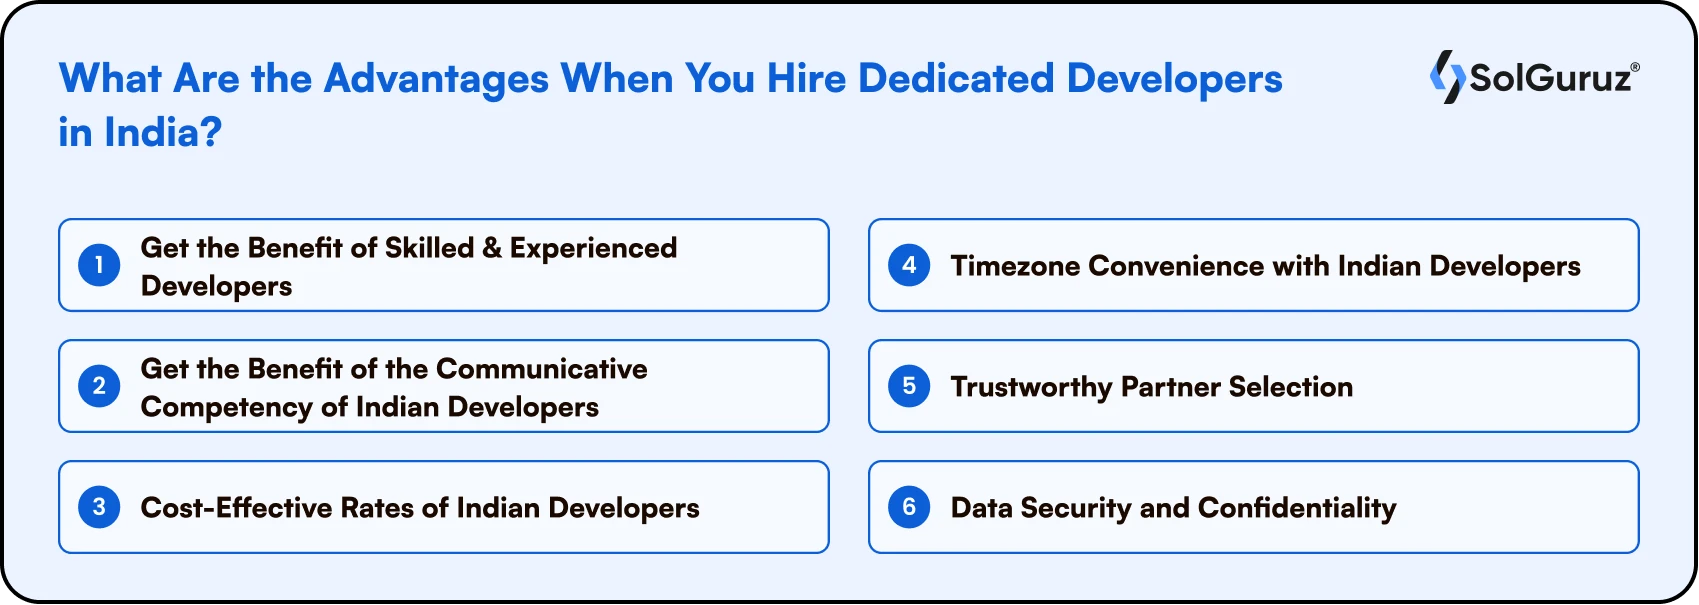 What Are the Advantages When You Hire Dedicated Developers in India